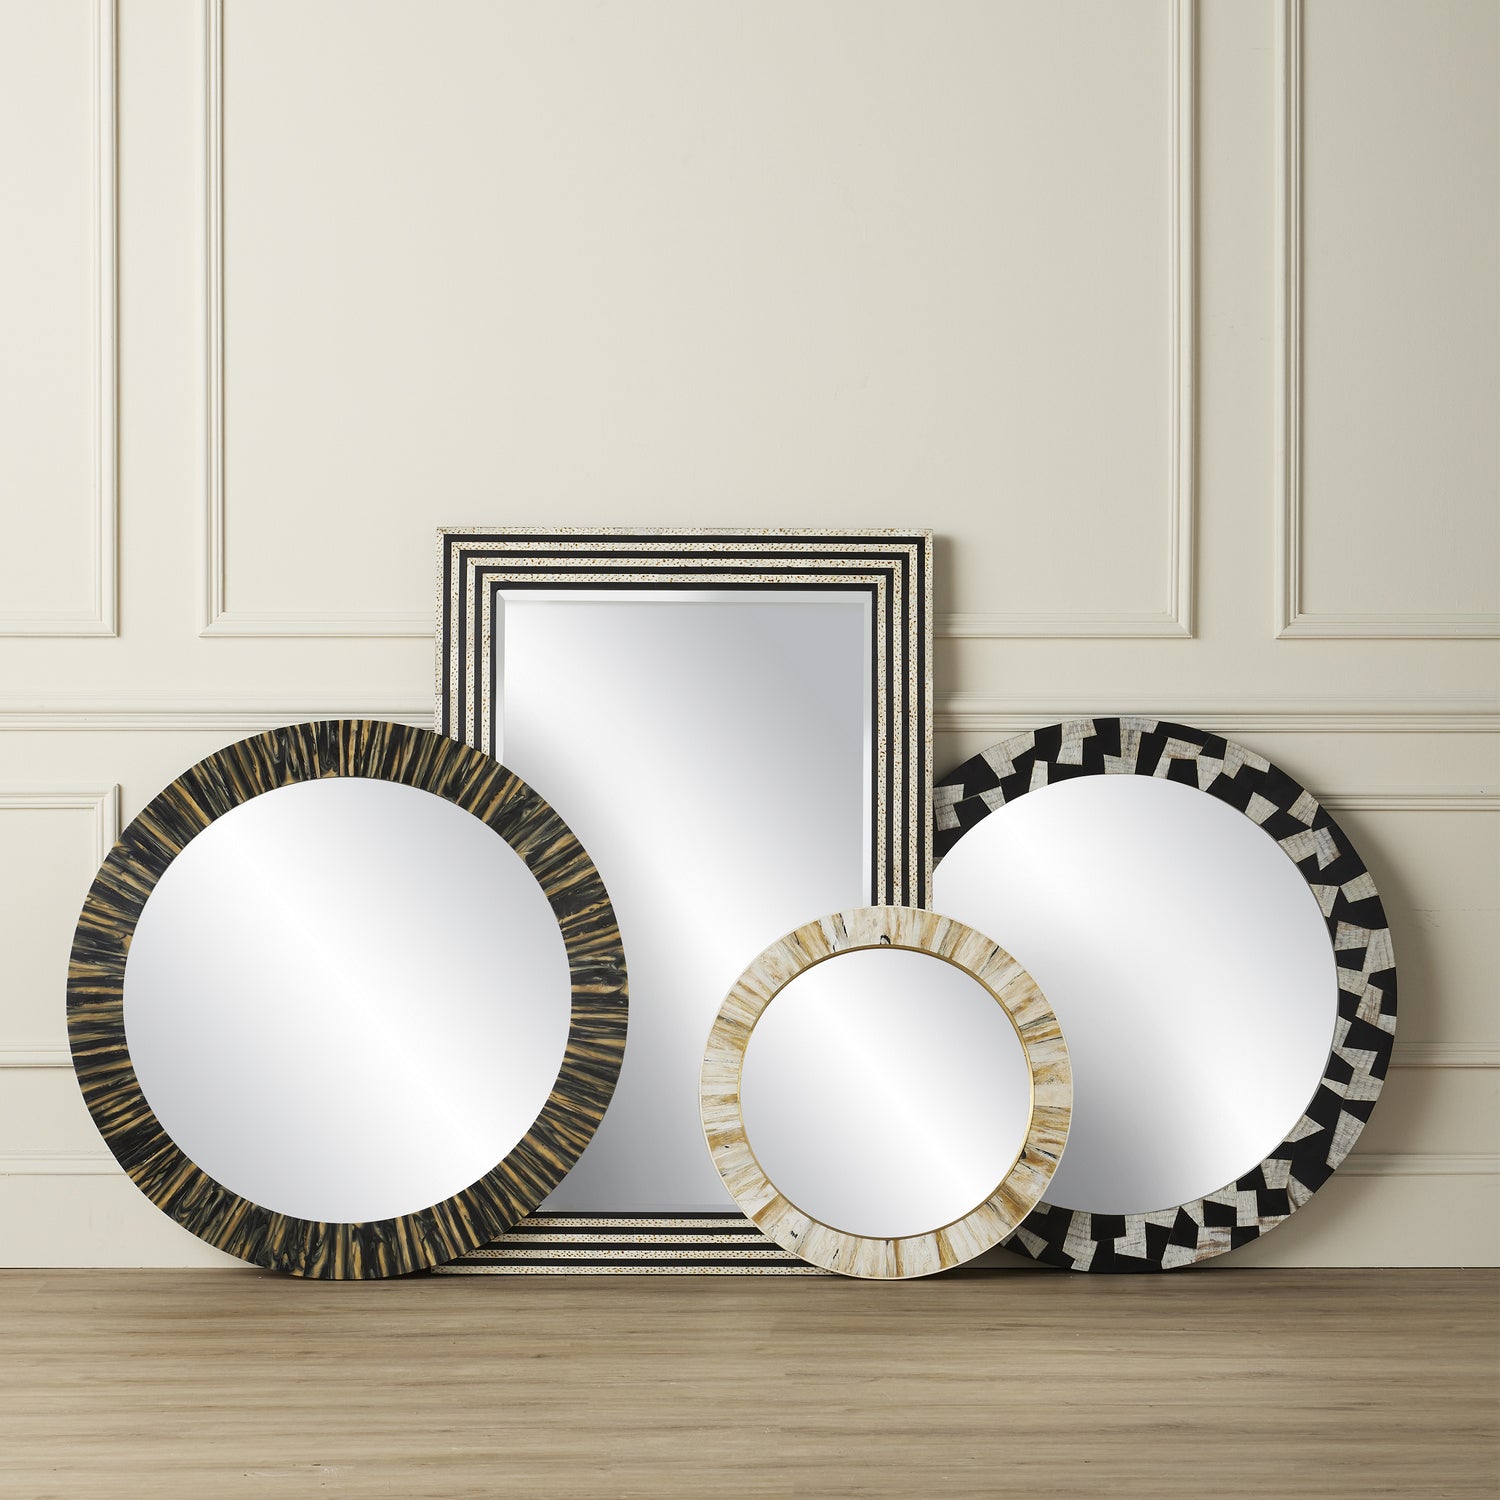 Mirror from the Taurus collection in White Speckle/Black/Mirror finish